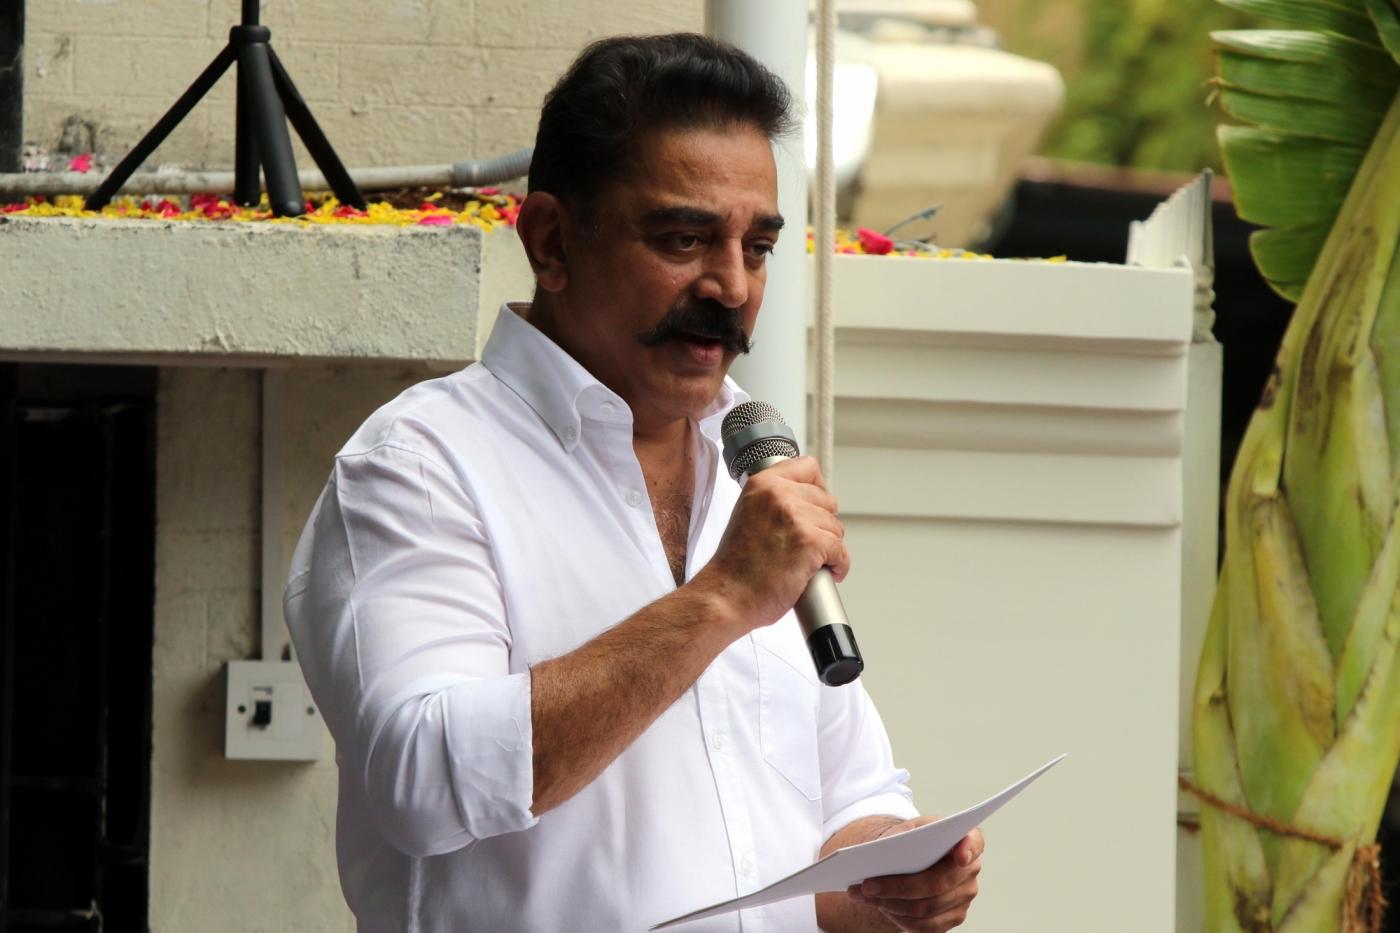 Chennai: Makkal Needhi Maiam (MNM) chief Kamal Hassan addresses party workers after hoisting his party's flag and announcing the names of his party's office bearers at the party office at Alwarpet, in Chennai on July 12, 2018. (Photo: IANS) by .